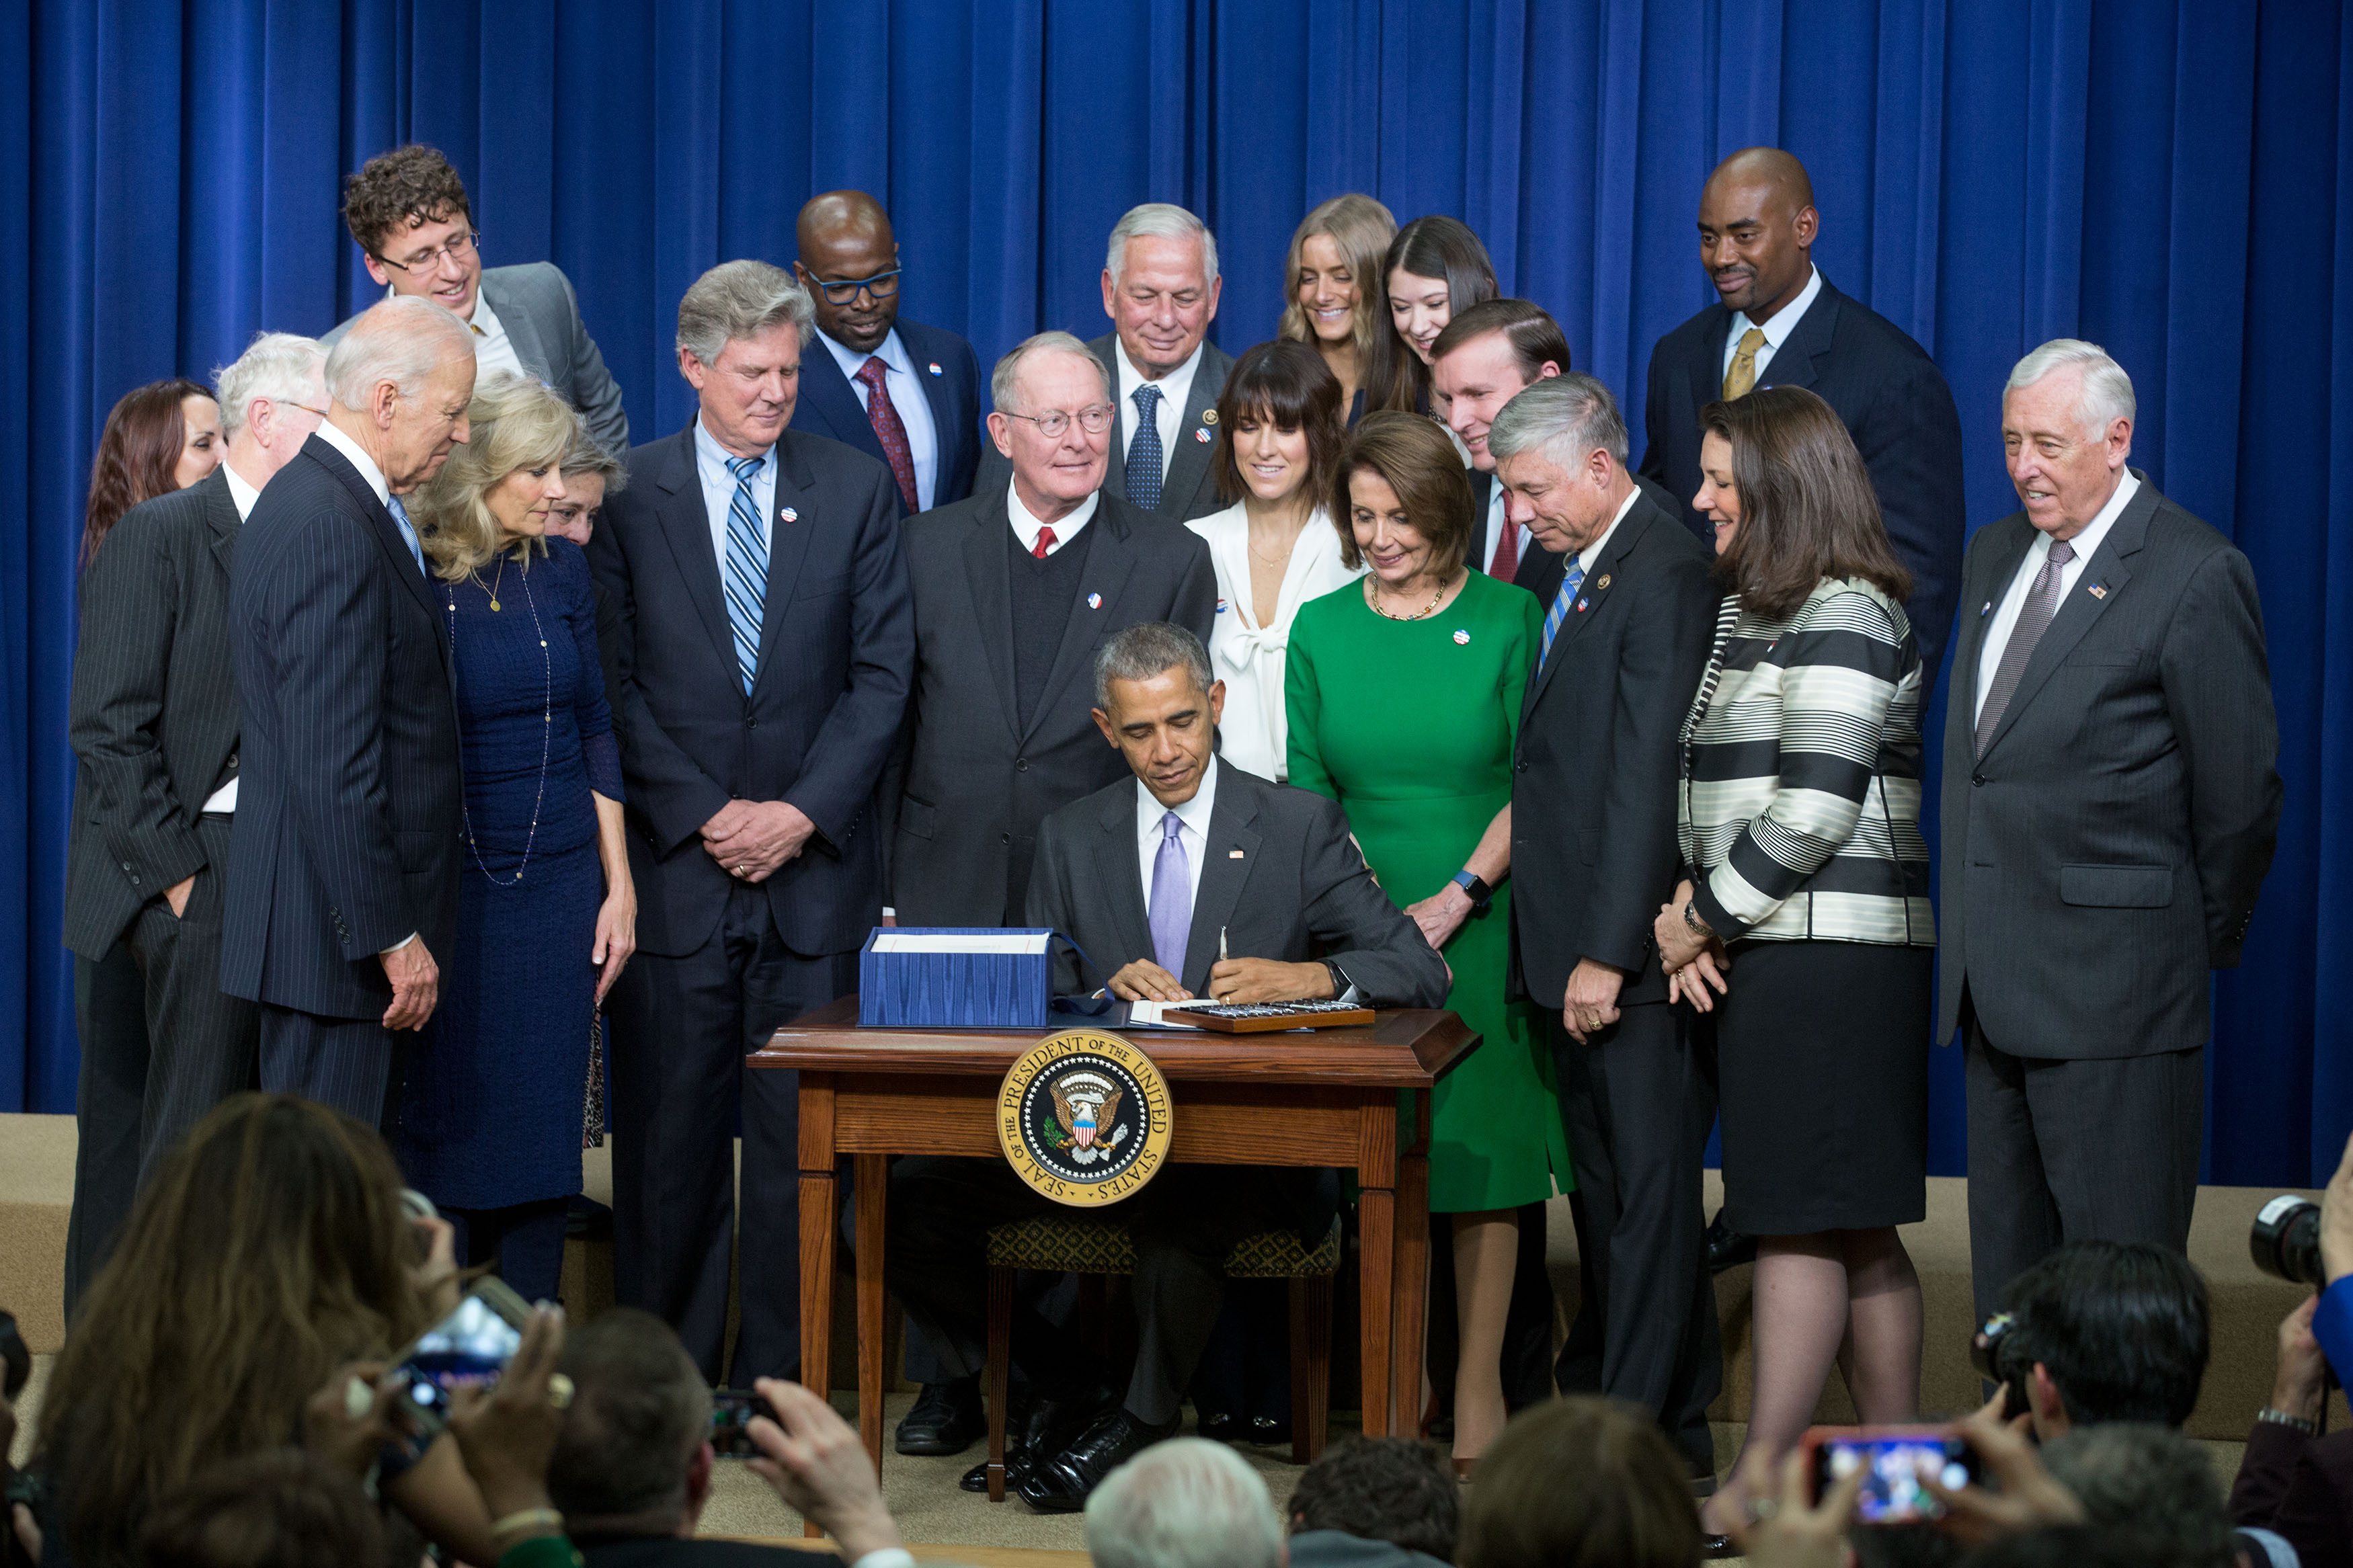   NFL Ambassador and International Health Care Advocate, Chris Draft, Attends Signing Ceremony At The White House For 21st Century Cures Act